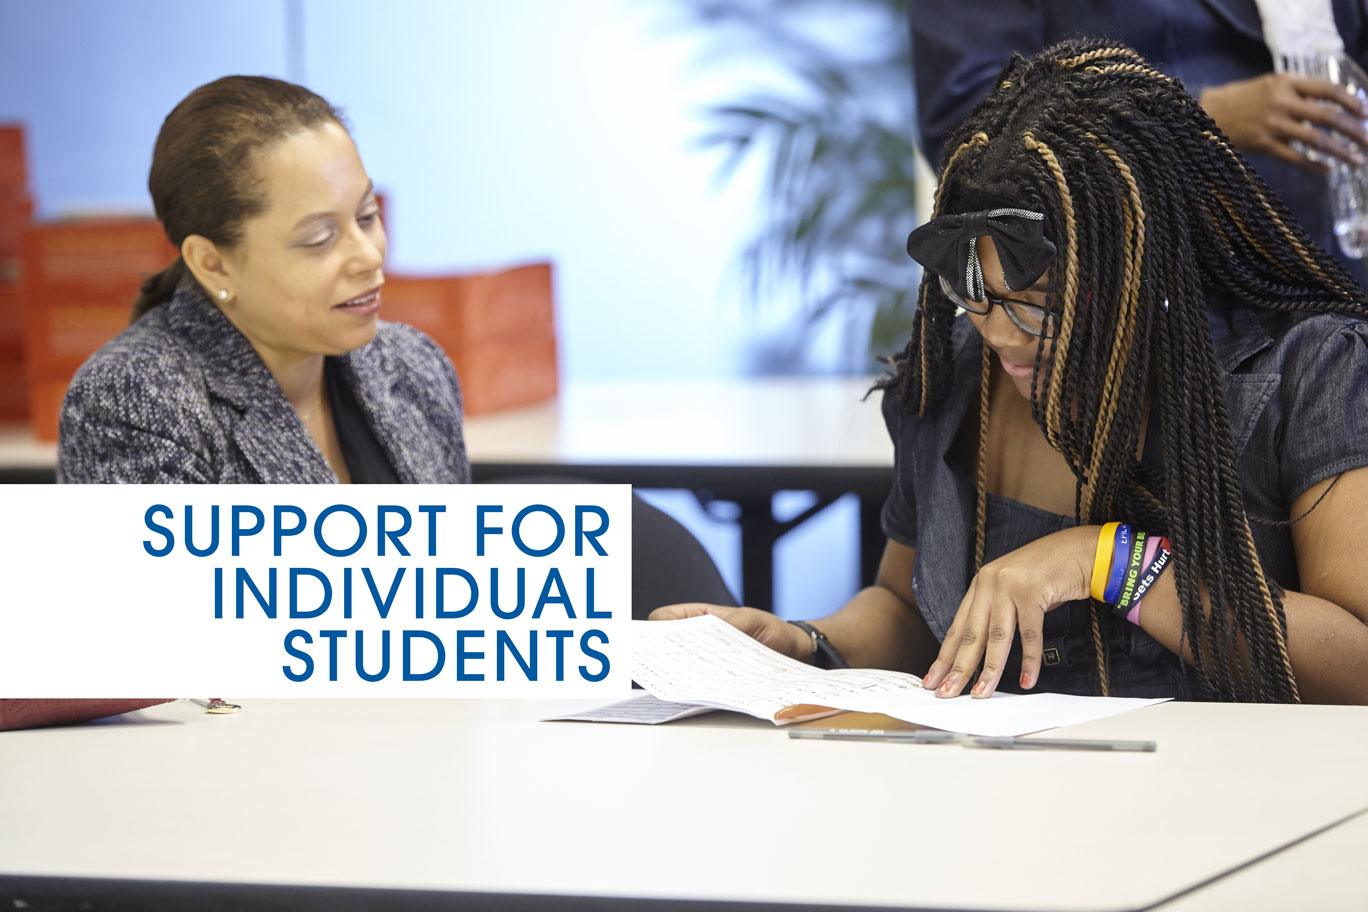 SUPPORT FOR INDIVIDUAL STUDENTS